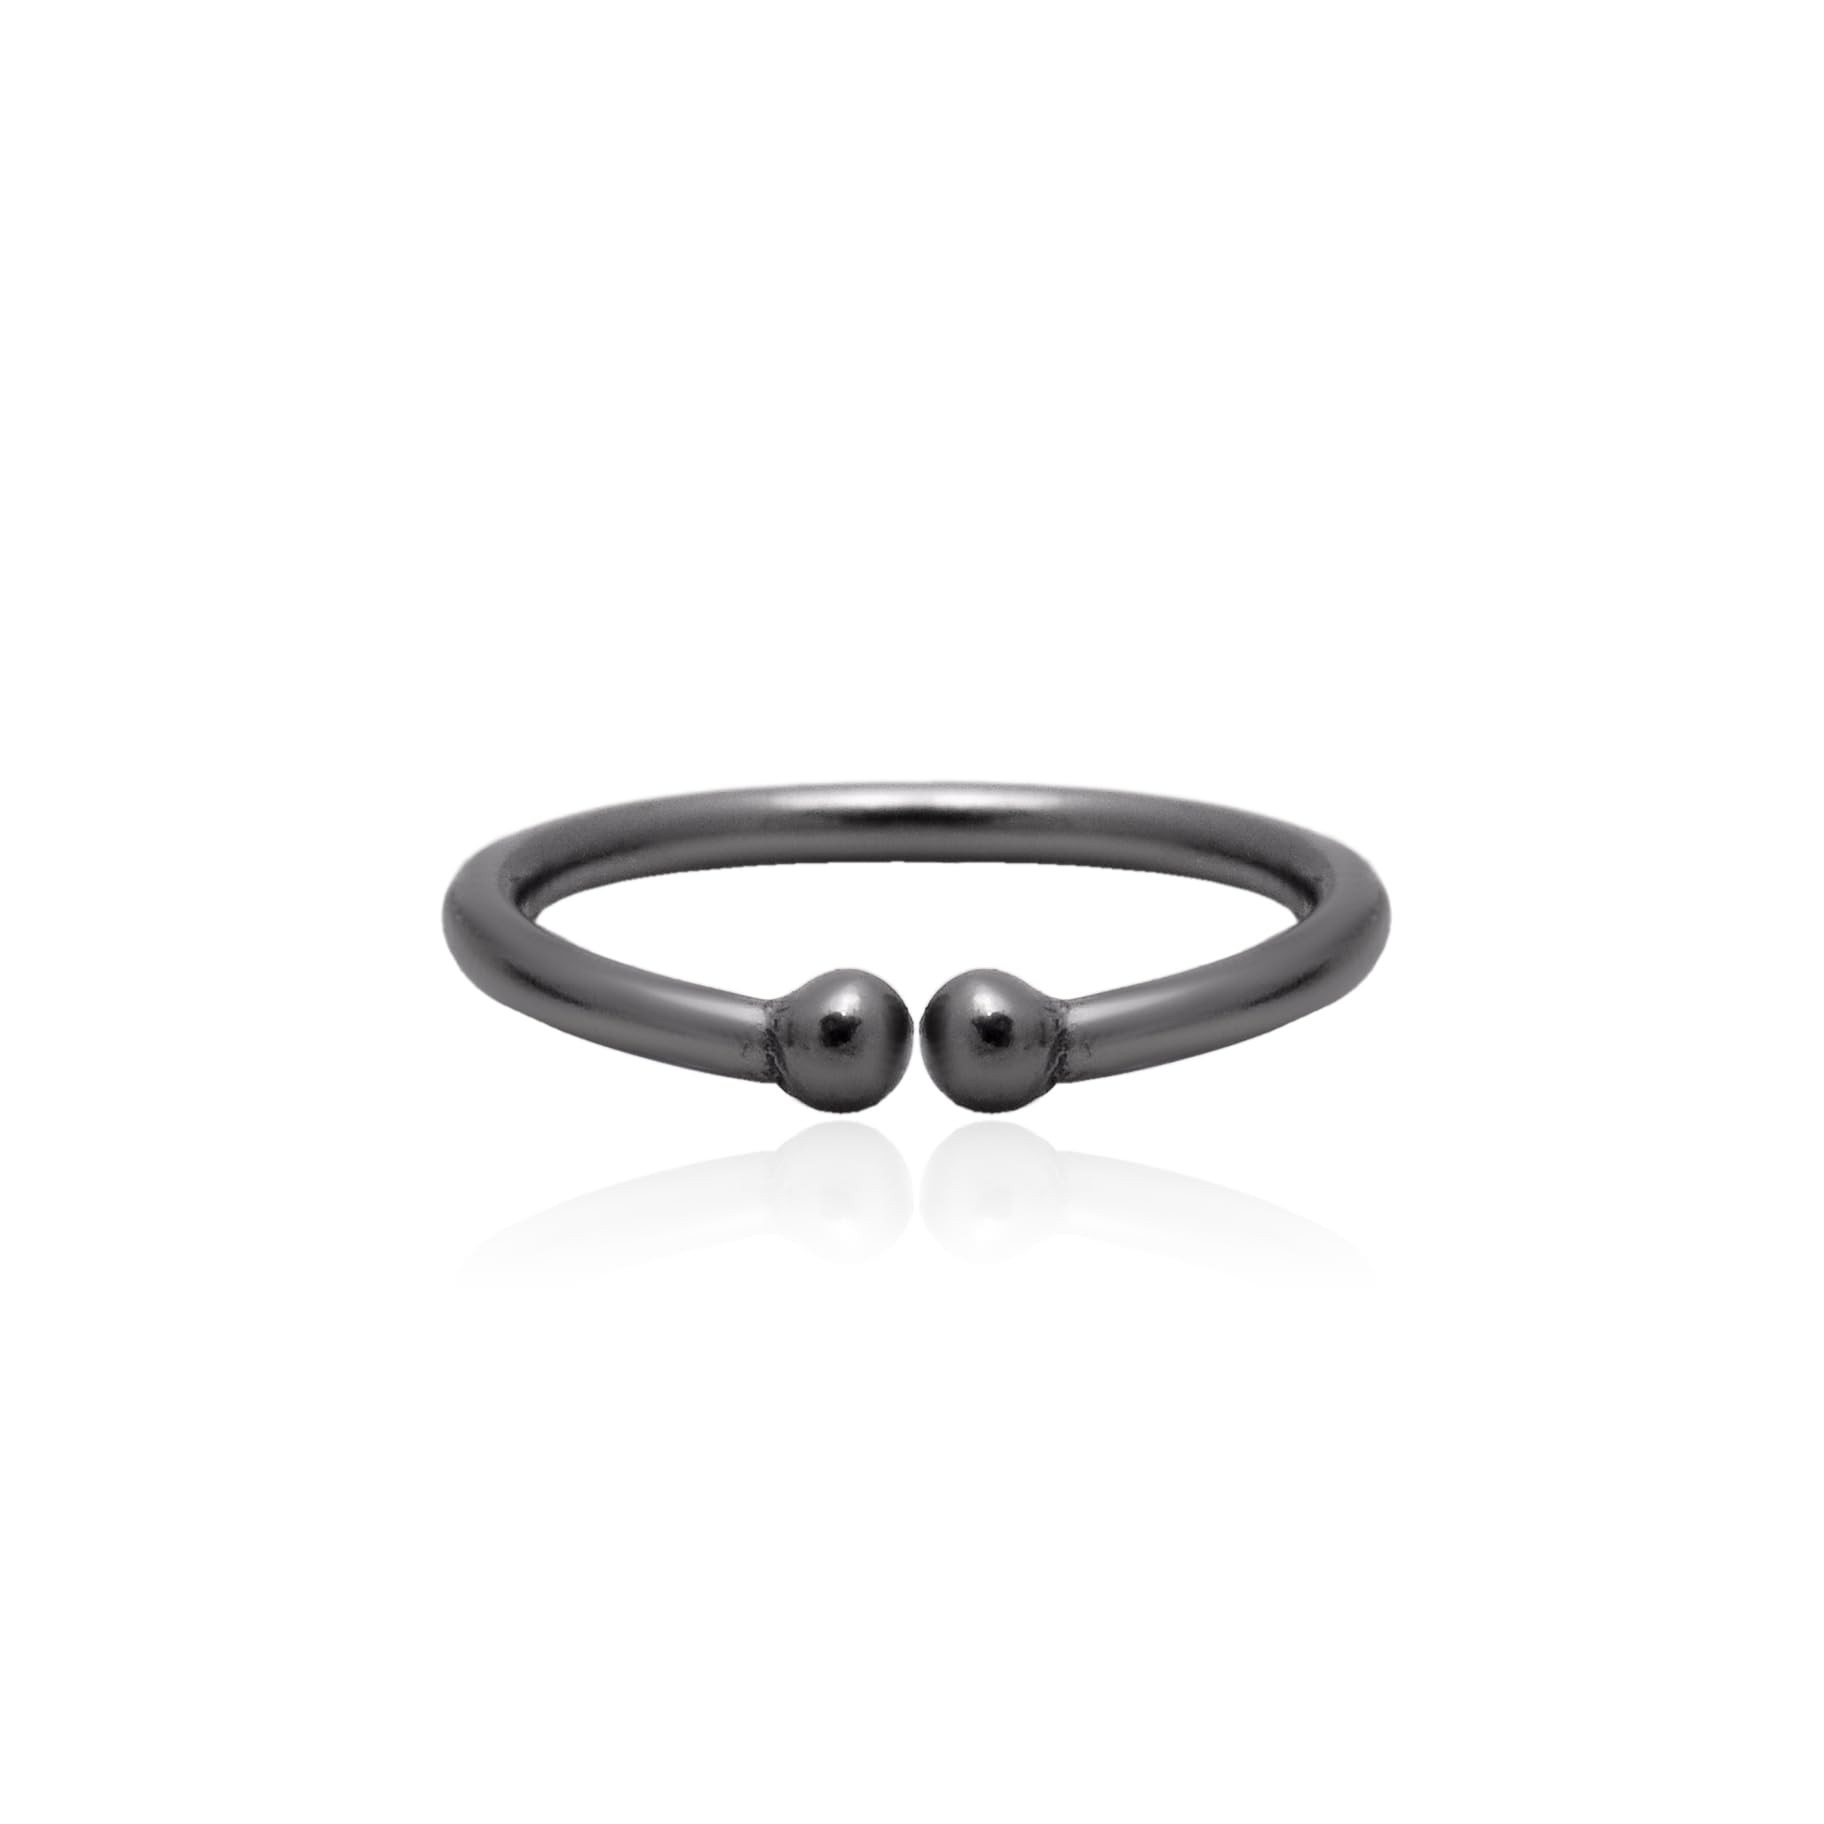 A sophisticated and stylish men's nose ring | Wish